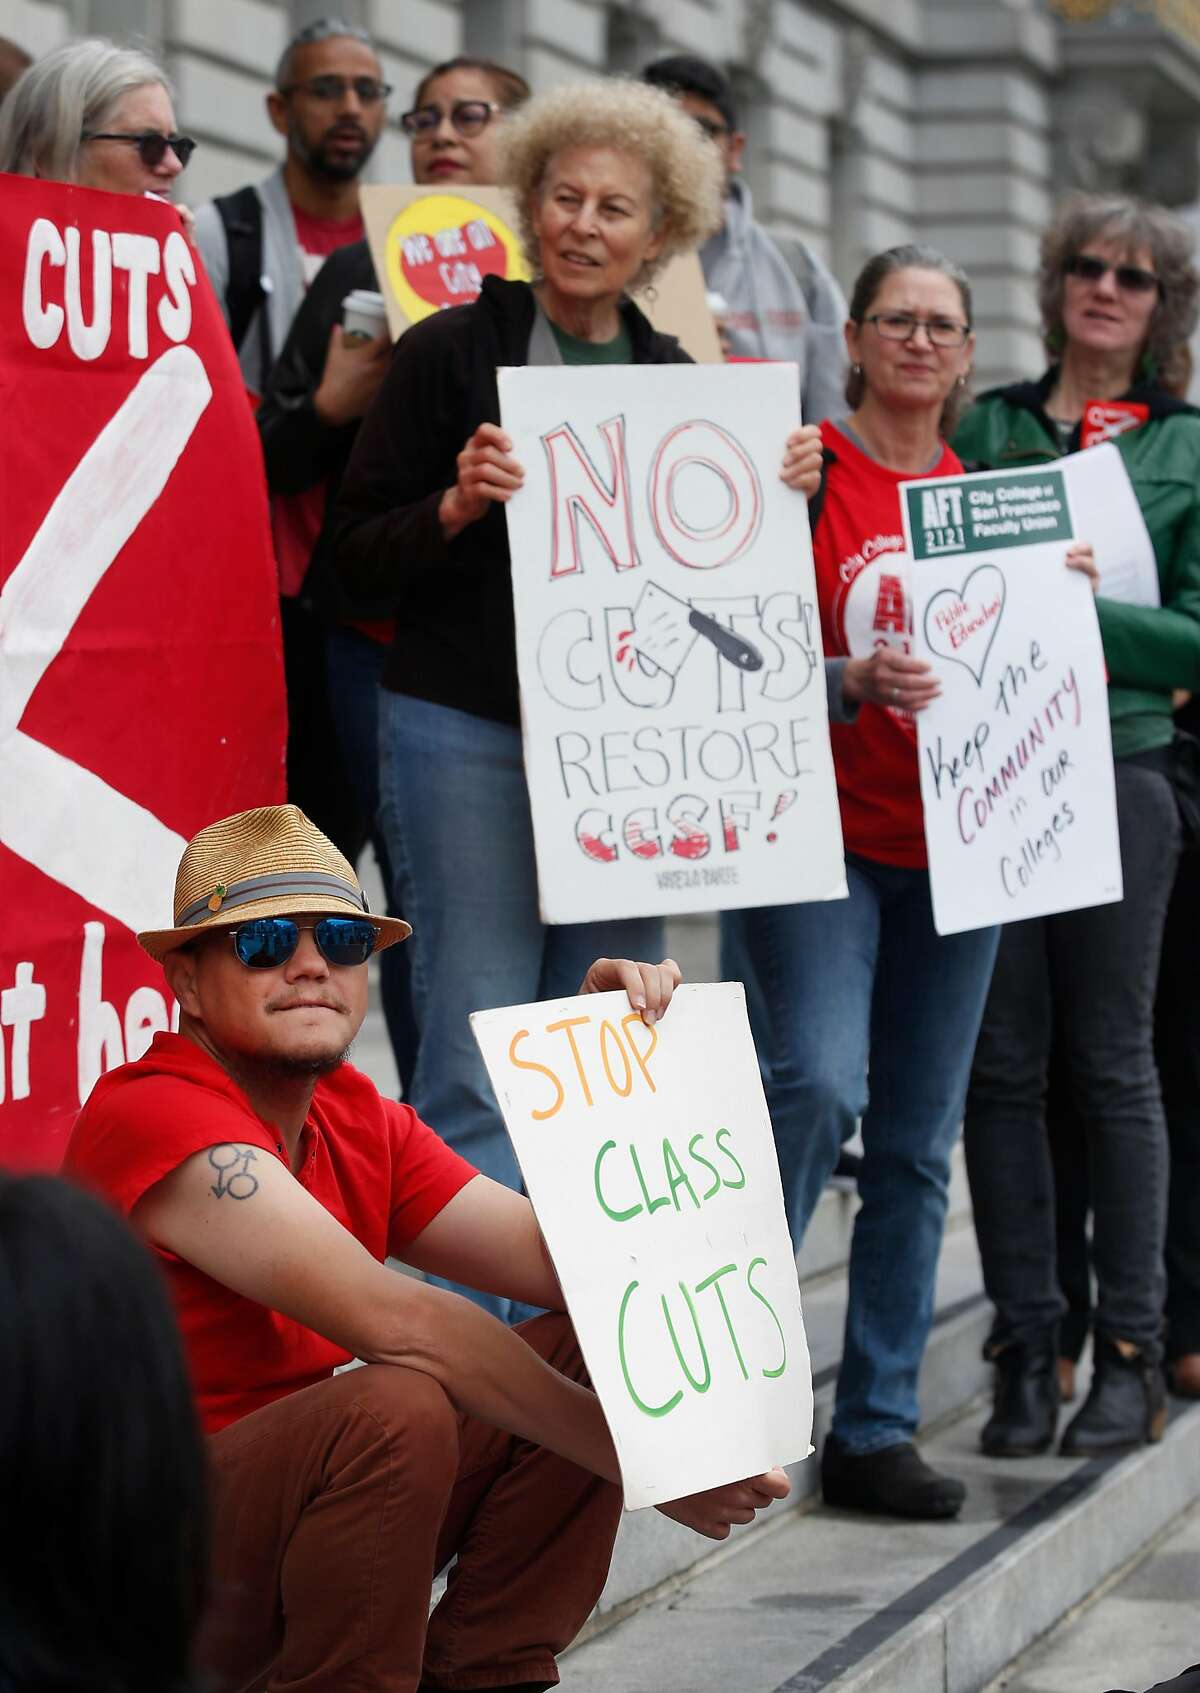 Anakh Sul Rama (lower left) joins students, faculty and members of the community concerned about proposed cuts at CCSF in a rally on the steps of City Hall before a hearing convened by the Joint City, School District and City College Select Committee in San Francisco, Calif. on Friday, May 10, 2019.